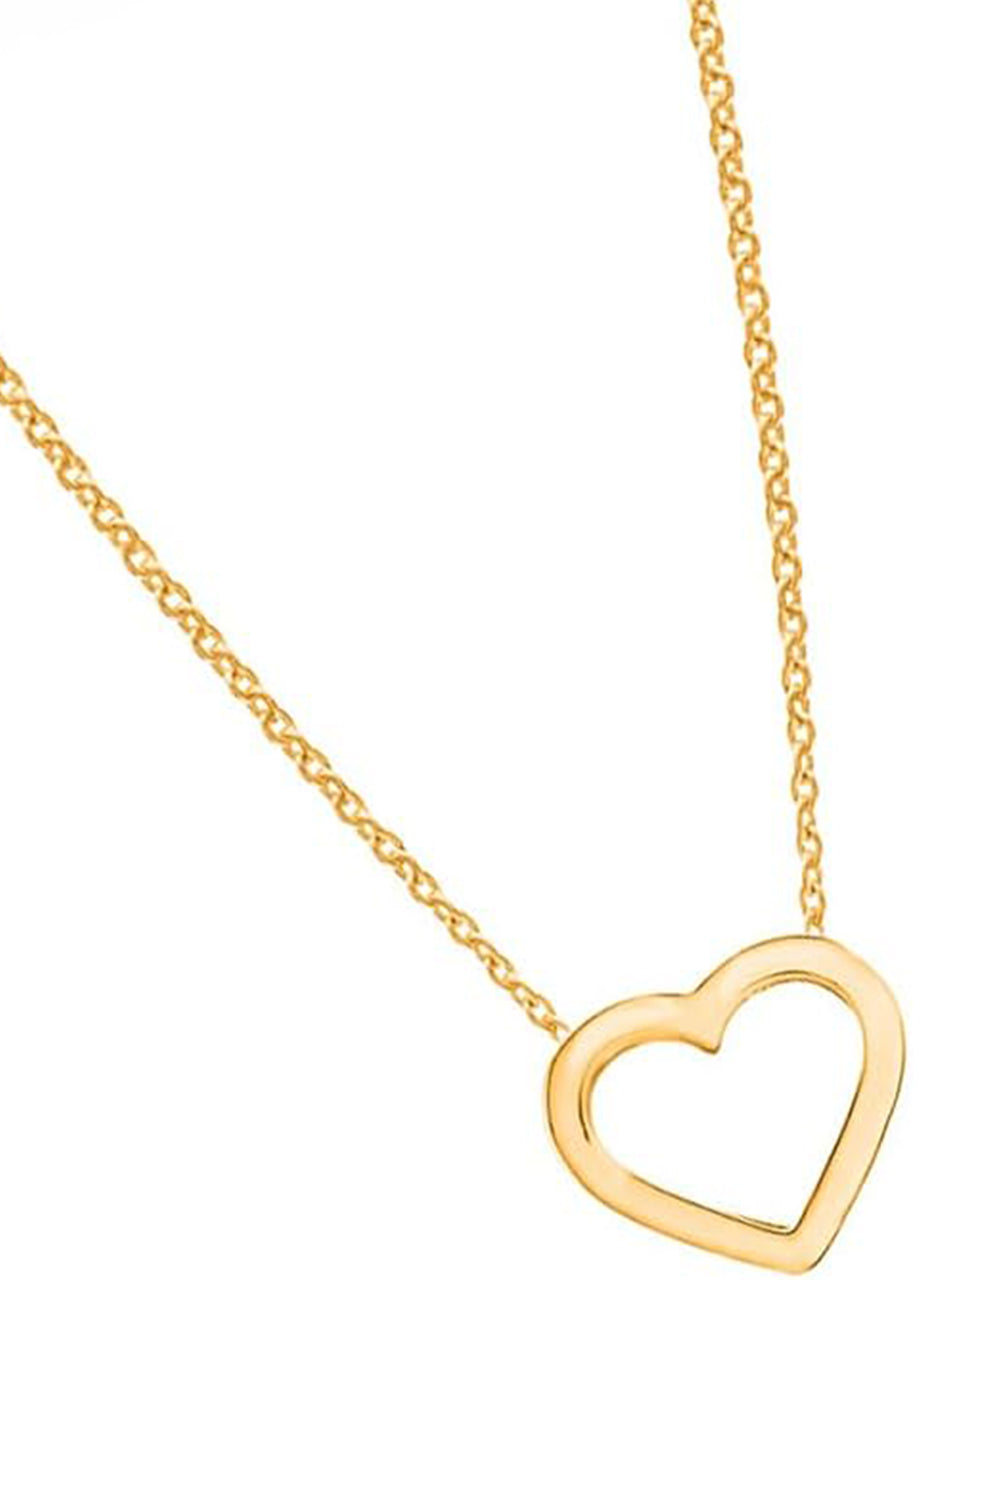 Yellow Gold Color Open Heart Pendant Necklace